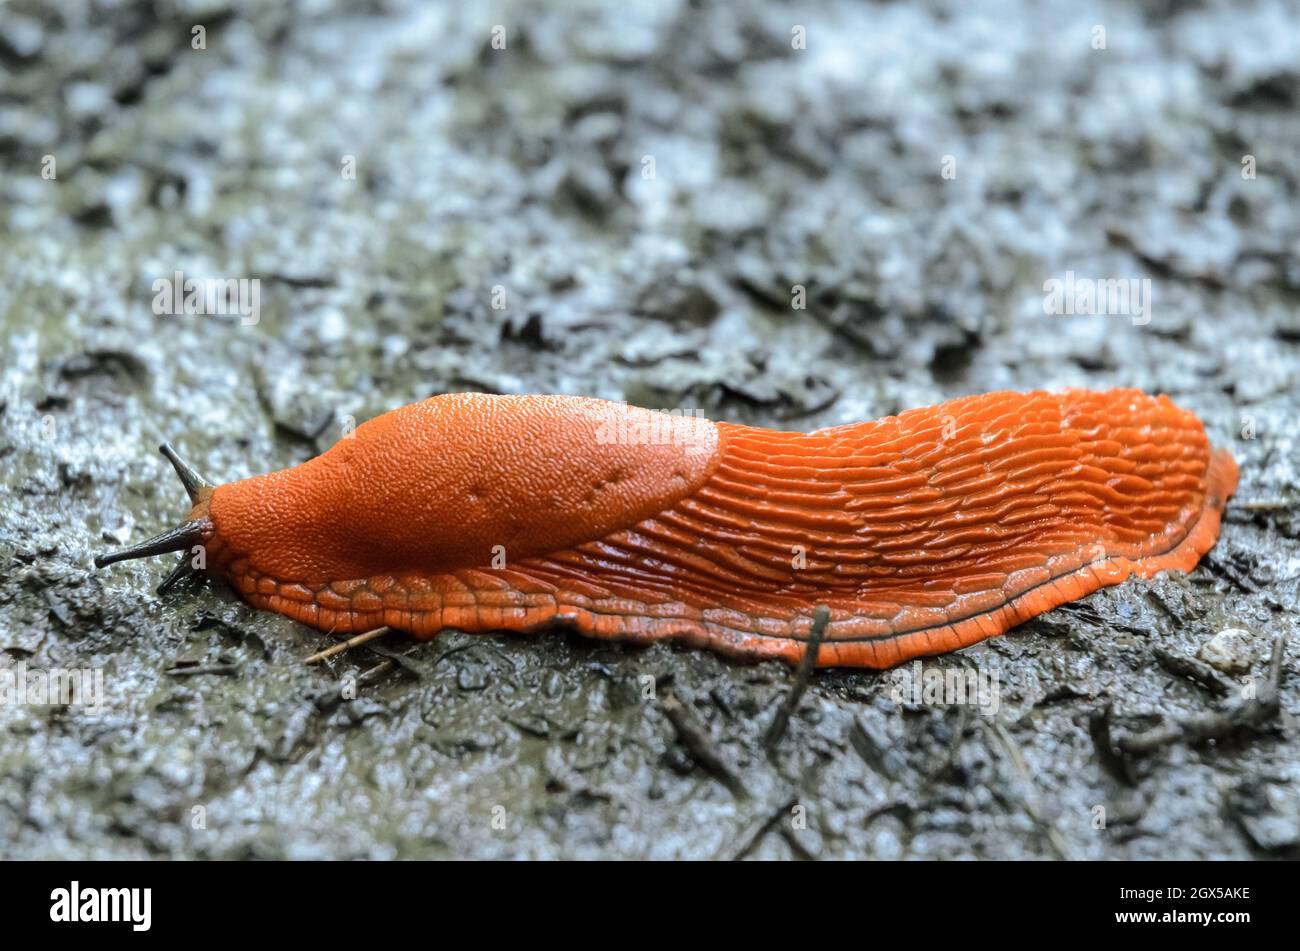 Red slug, Arion rufus, also known as the large red slug, chocolate arion and european red slug, Germany, Europe Stock Photo